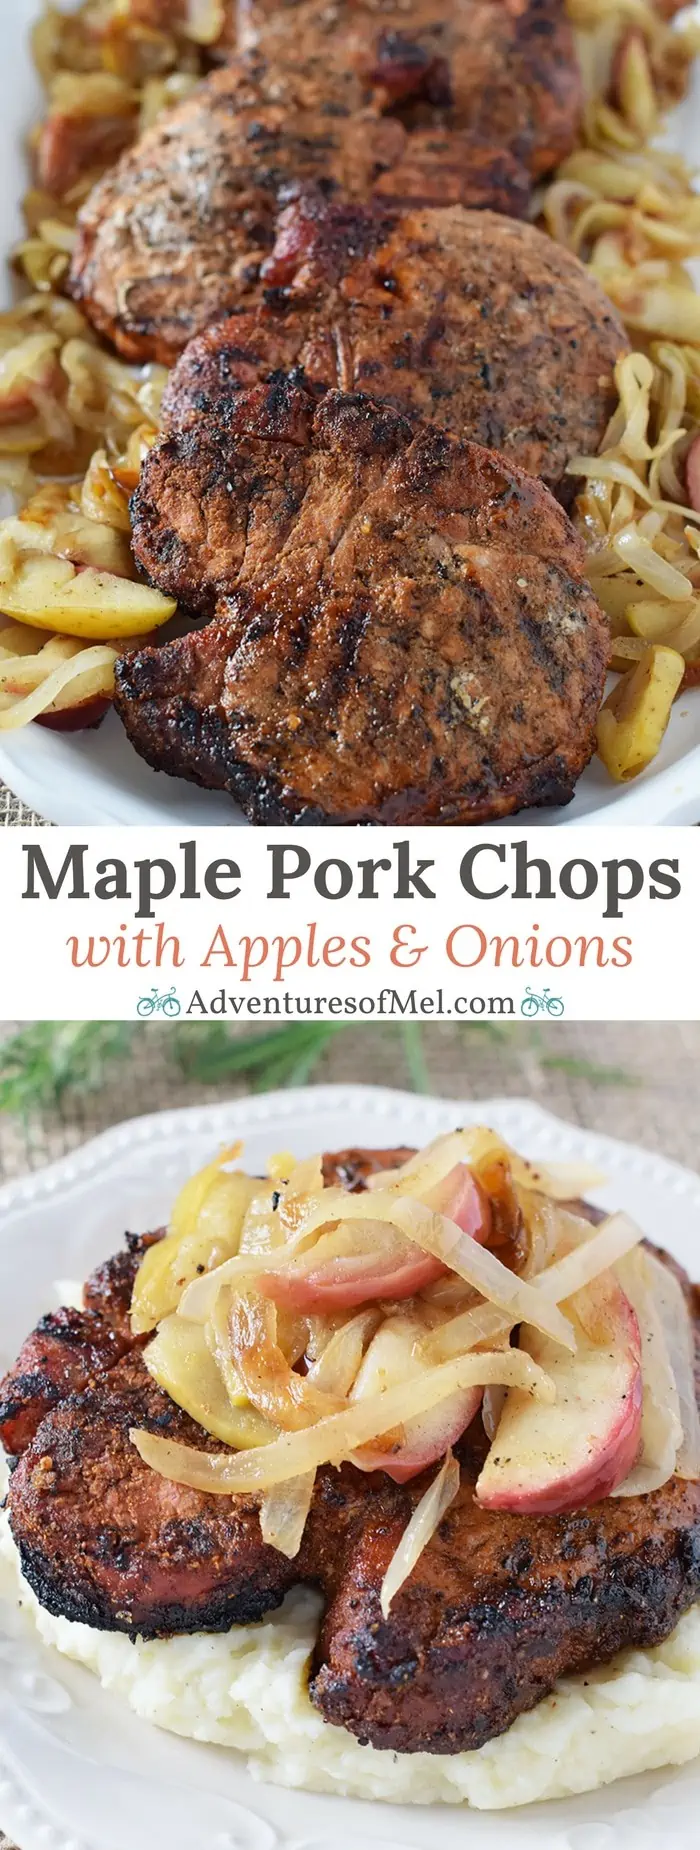 Maple Pork Chops grilled to perfection and topped with apples and onions for a delicious, satisfying, home cooked dinner the whole family will love.